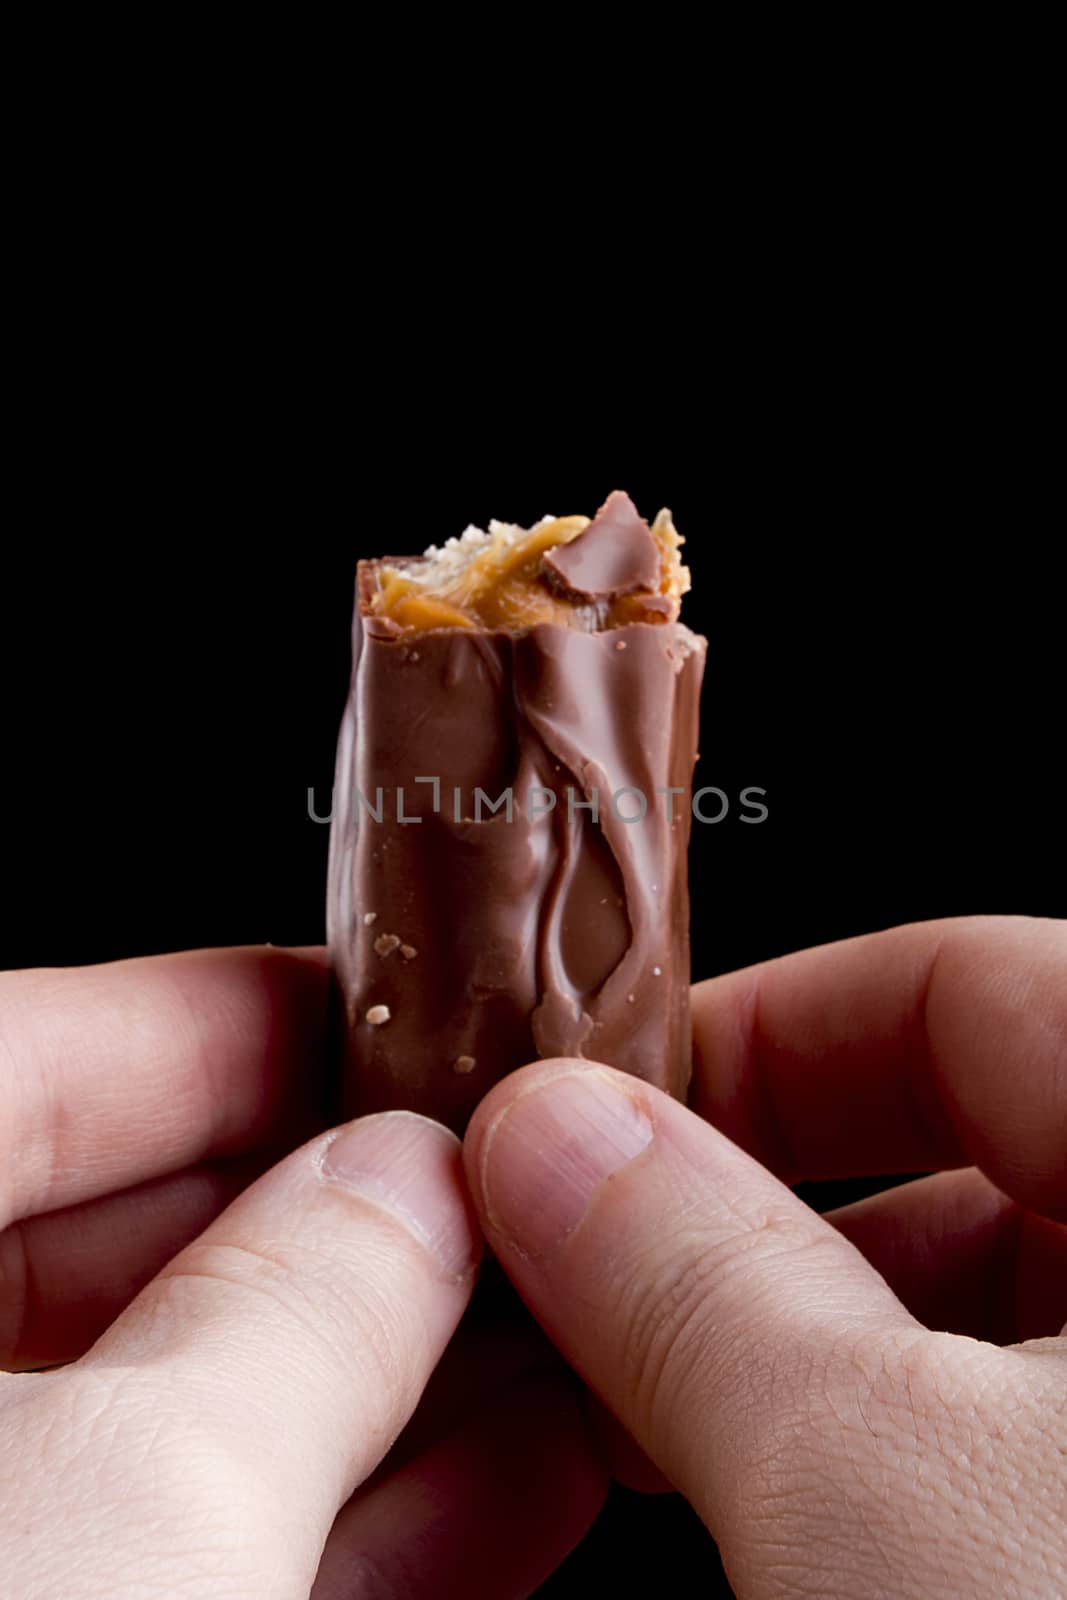 Chocolate bar with caramel filling in the hands.